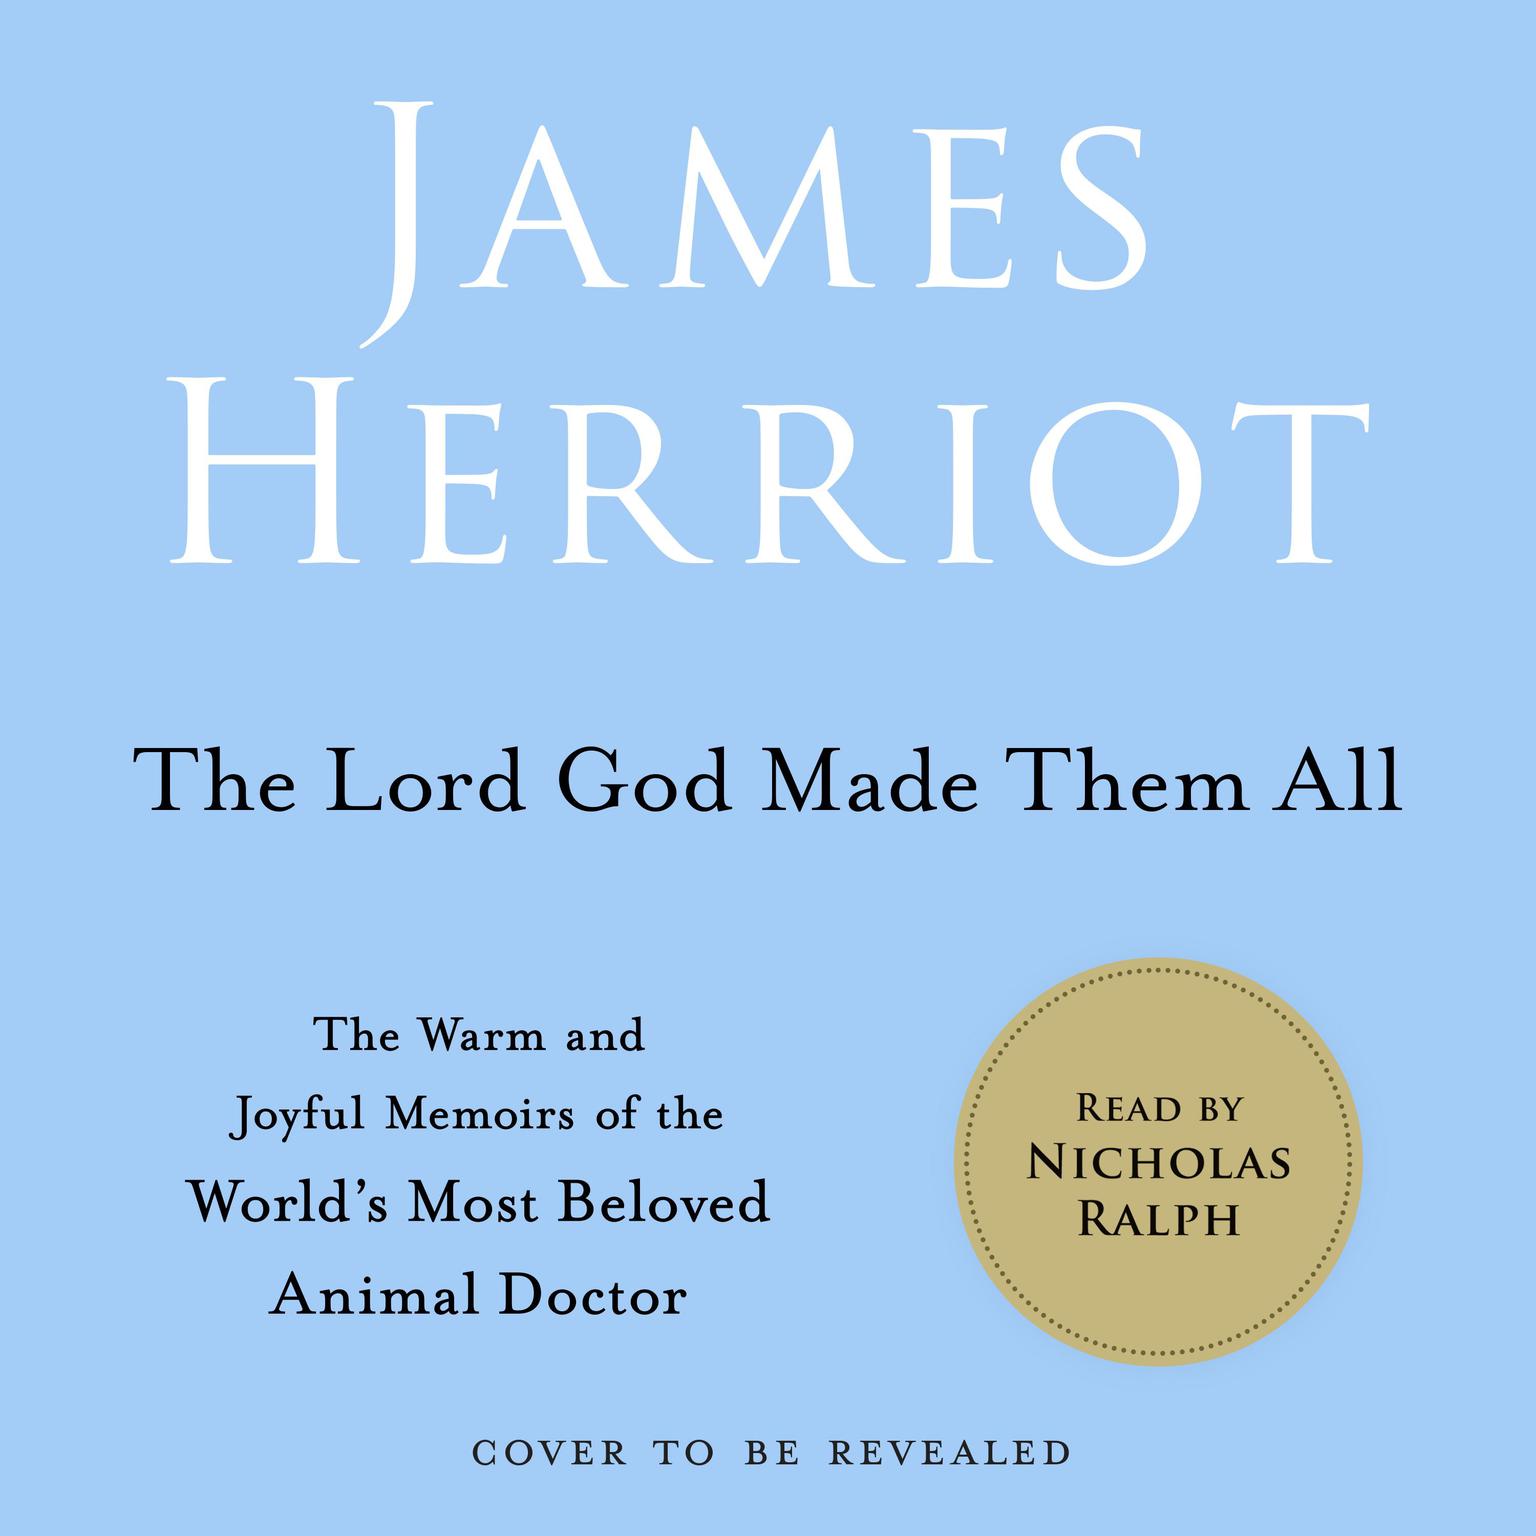 The Lord God Made Them All Audiobook, by James Herriot